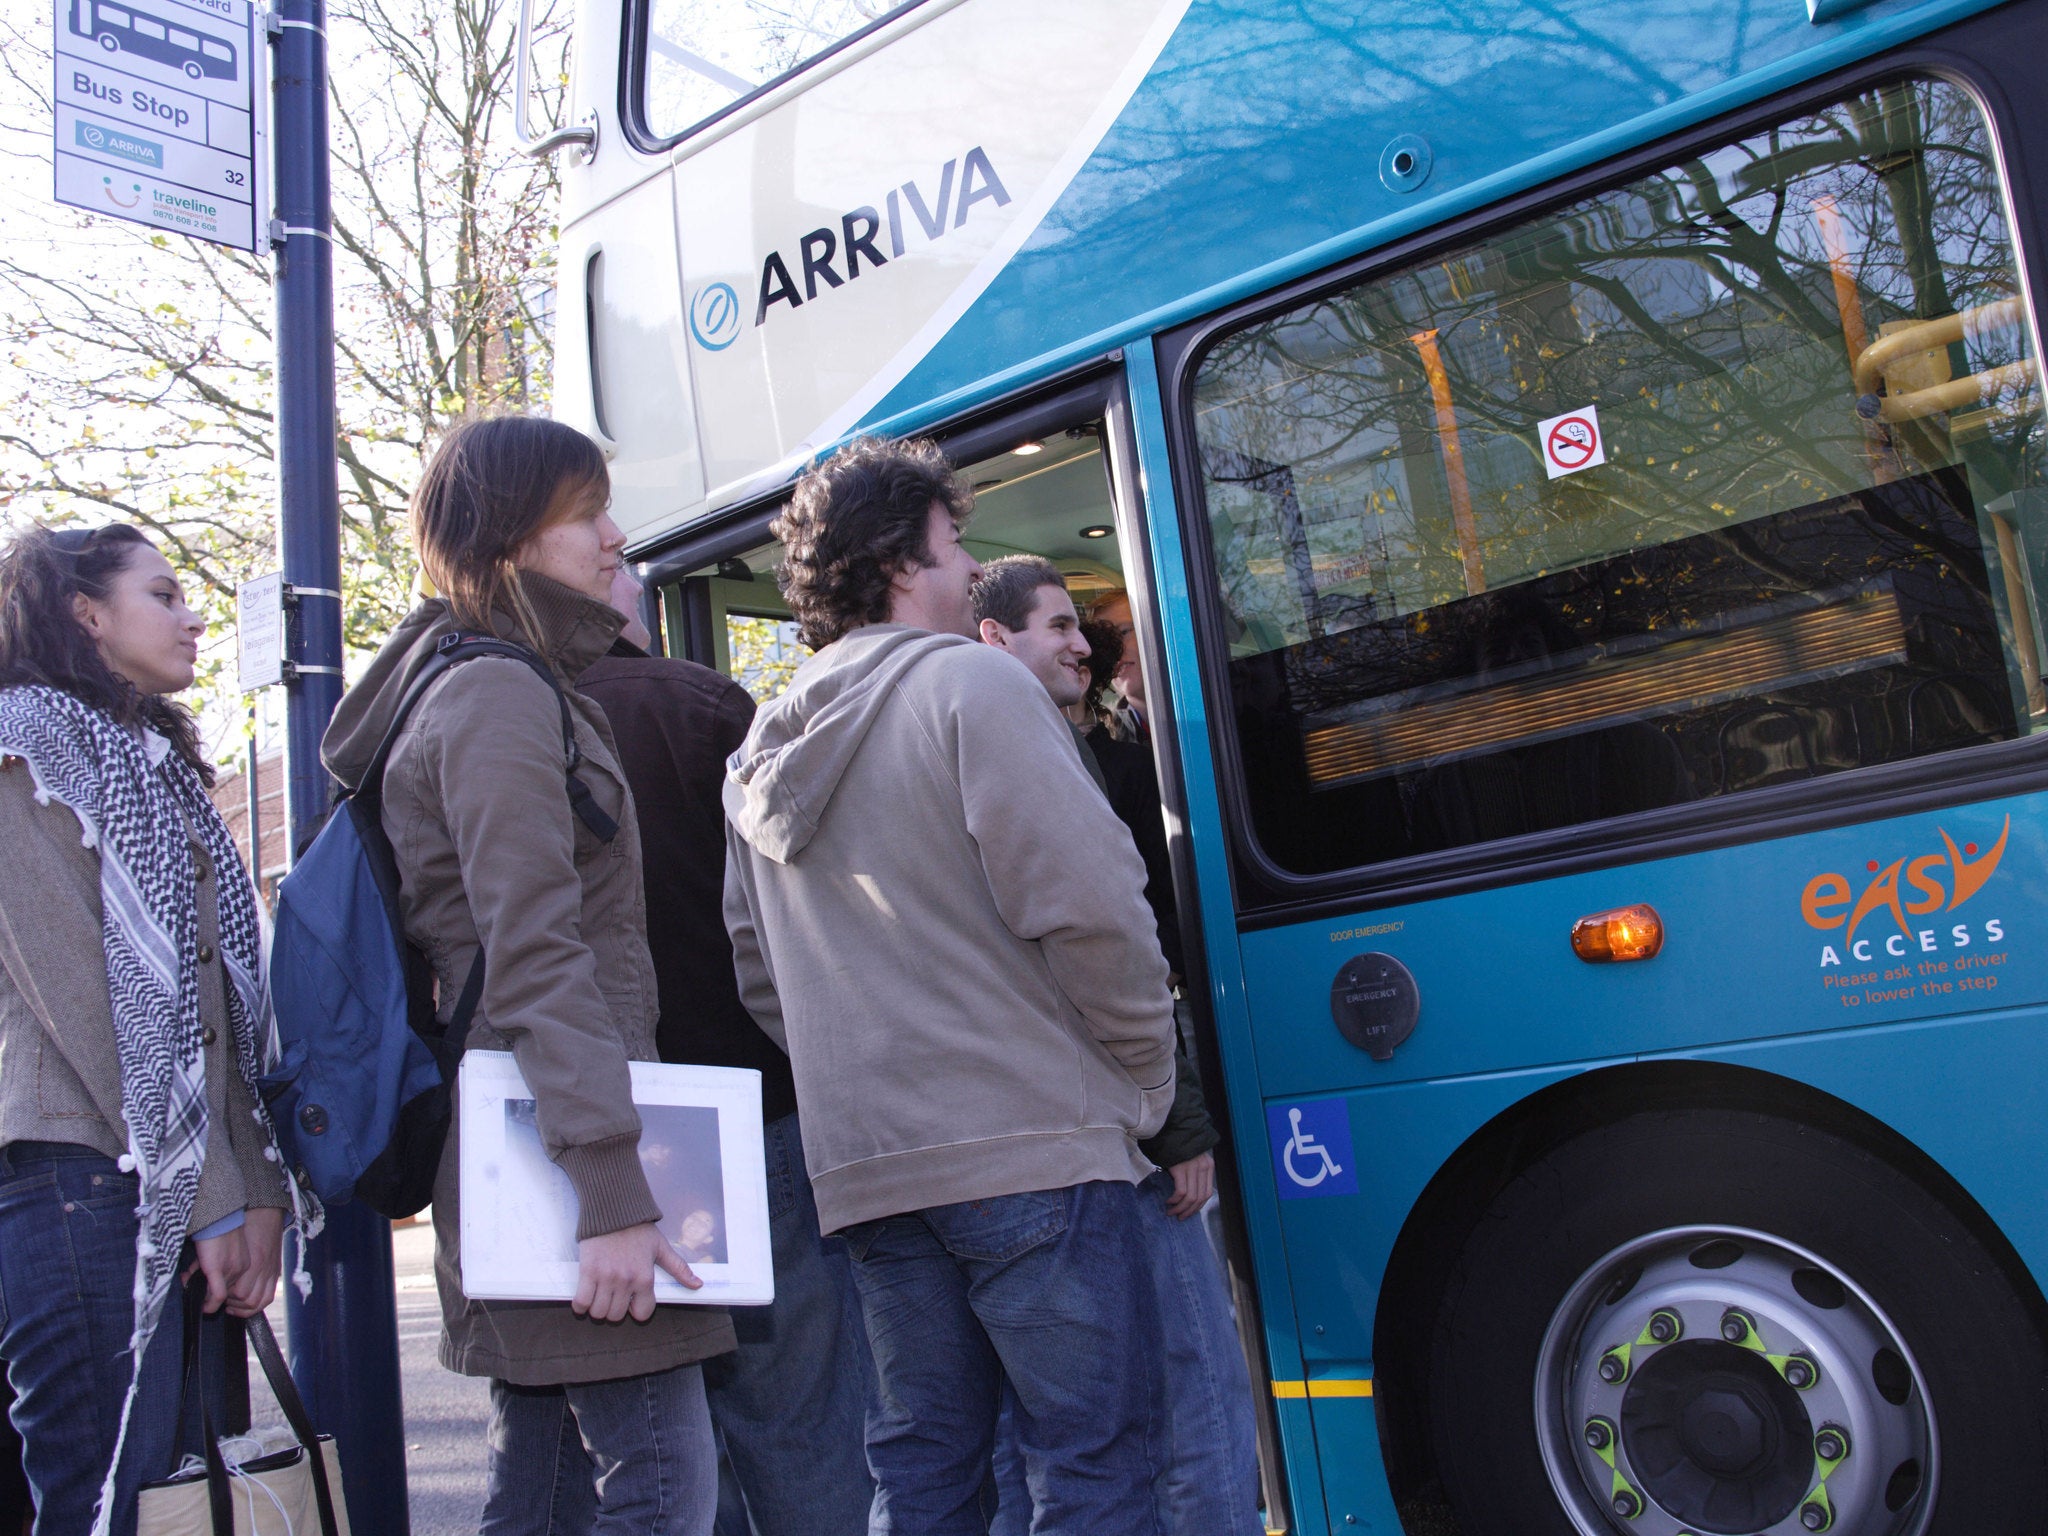 Oyster-style smart ticketing systems will roll out across bus networks in major urban areas in 2015